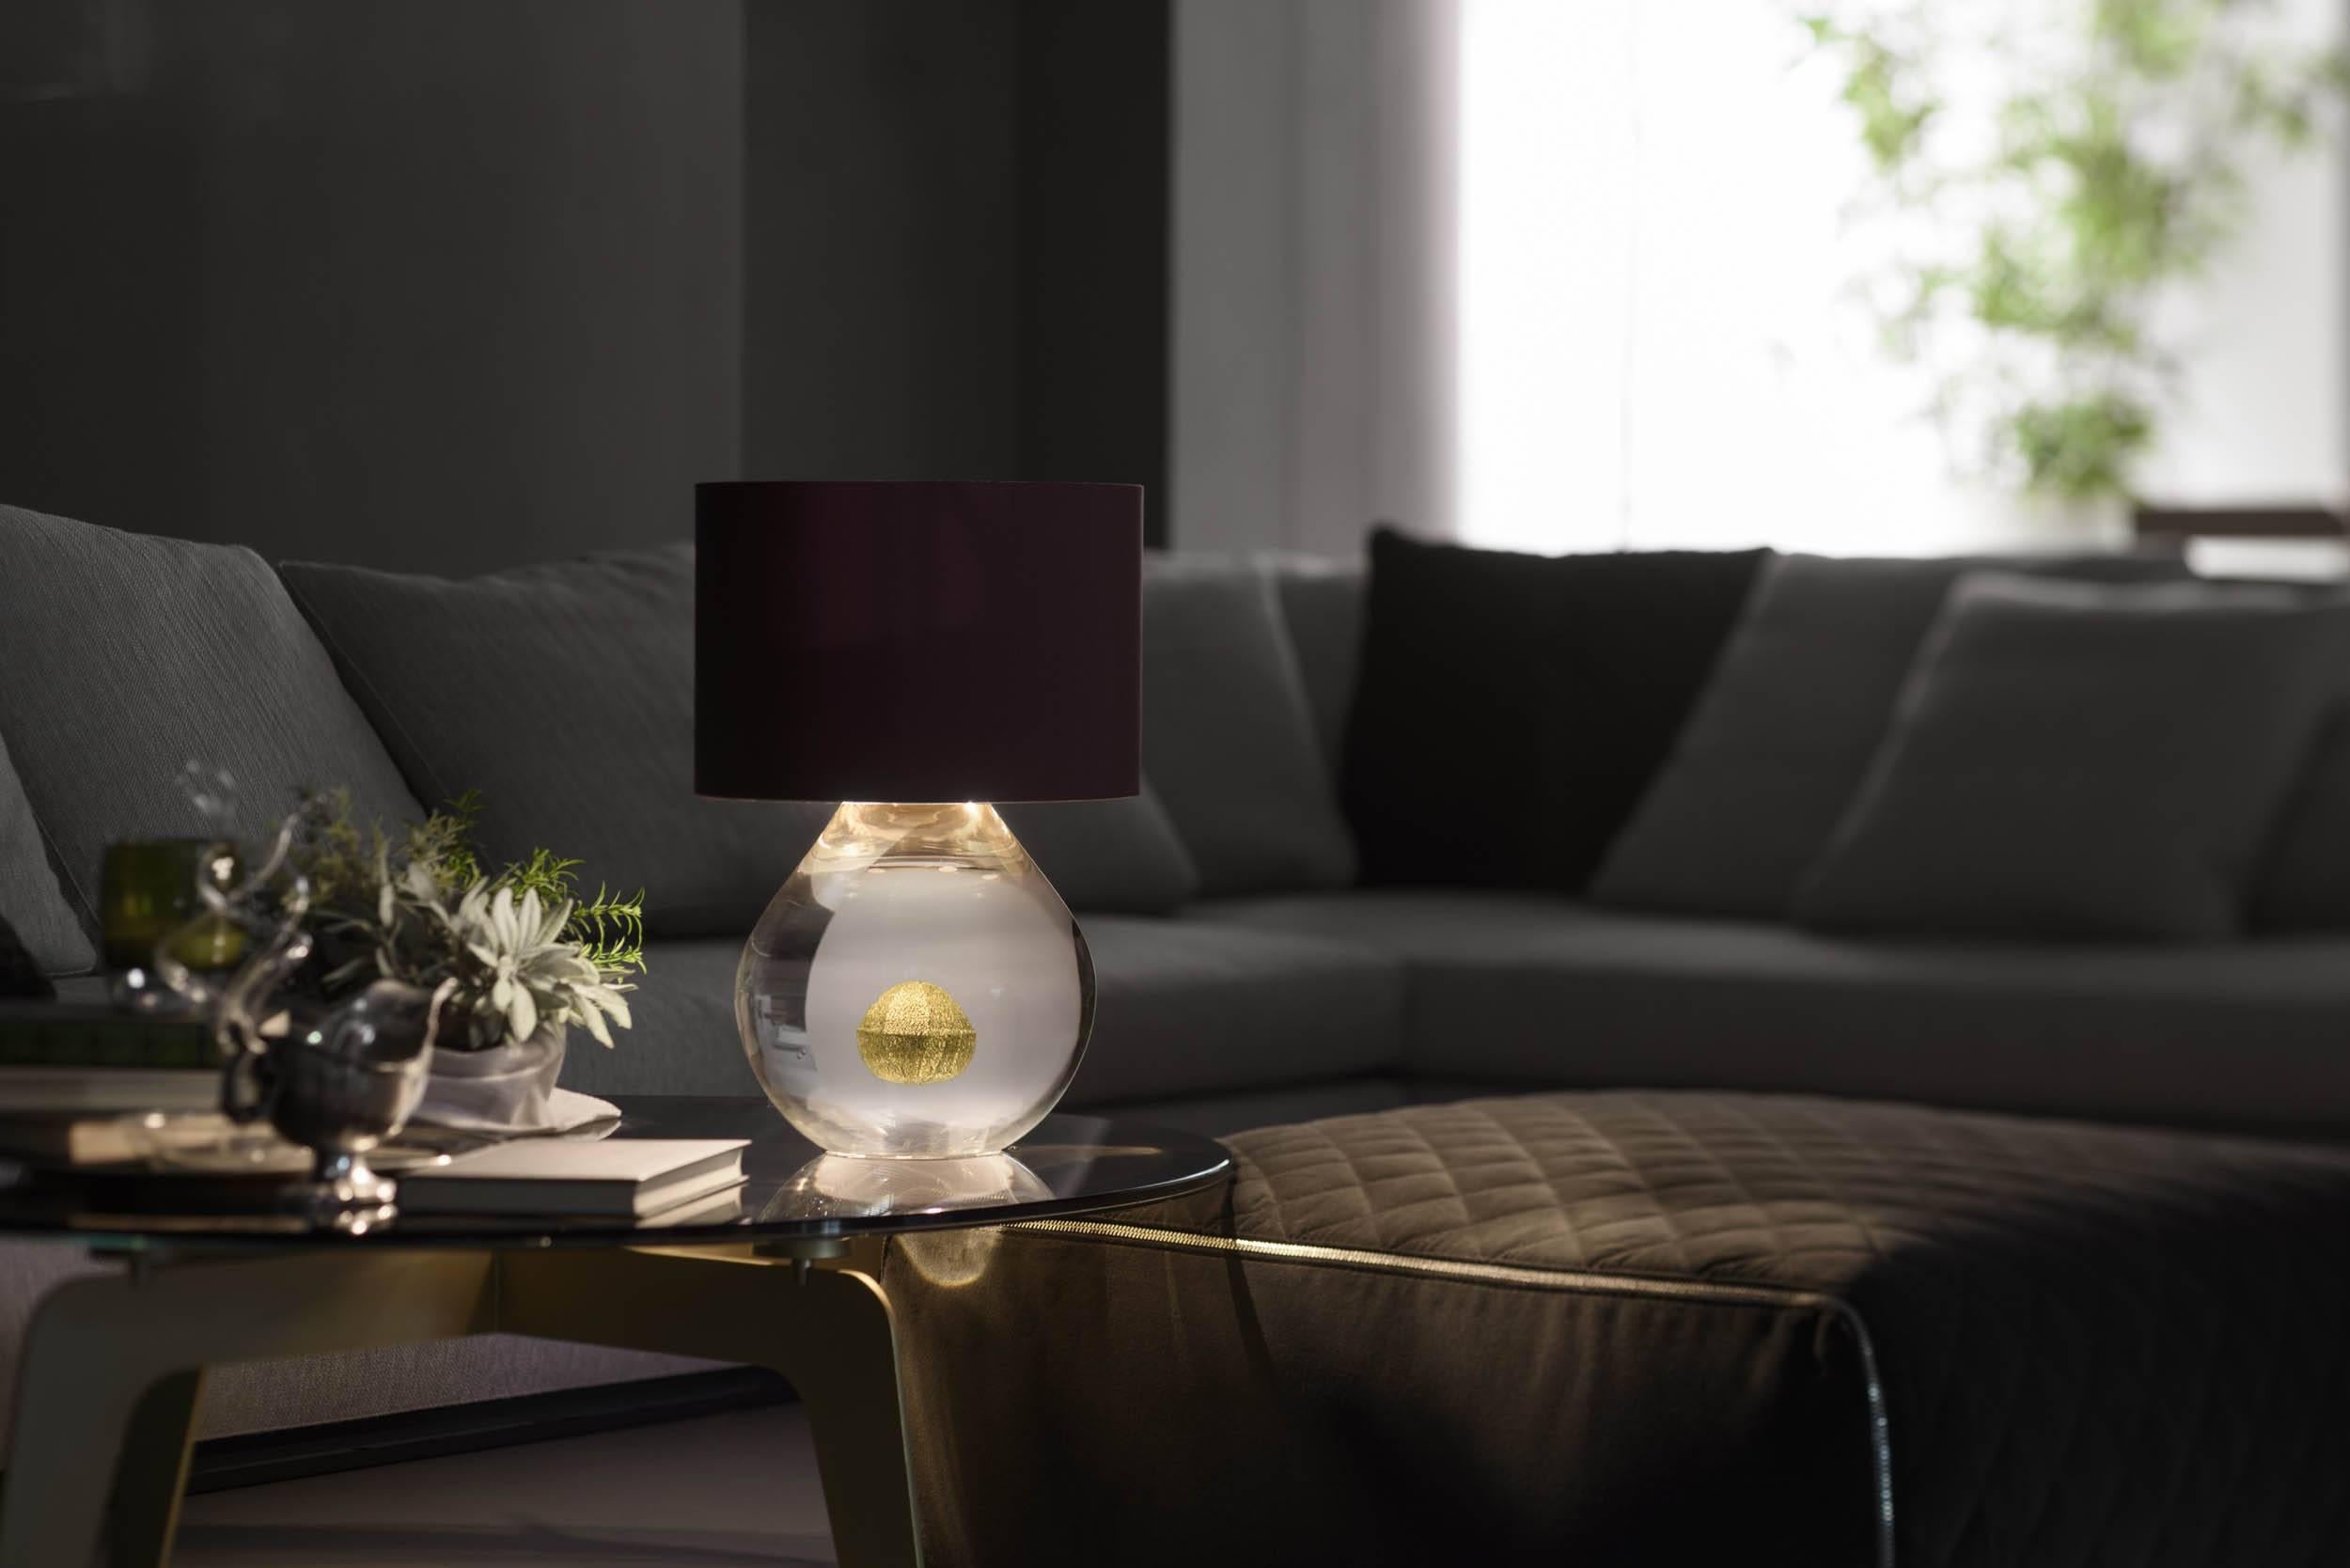 Anima is from our contemporary Sommerso collection of table lamps. The minimal design requires exceptional mastery of glass, which is free-blown (no mould is used) by ARS Murano. It was designed by the prize-winning Brogliato Traverso studio in